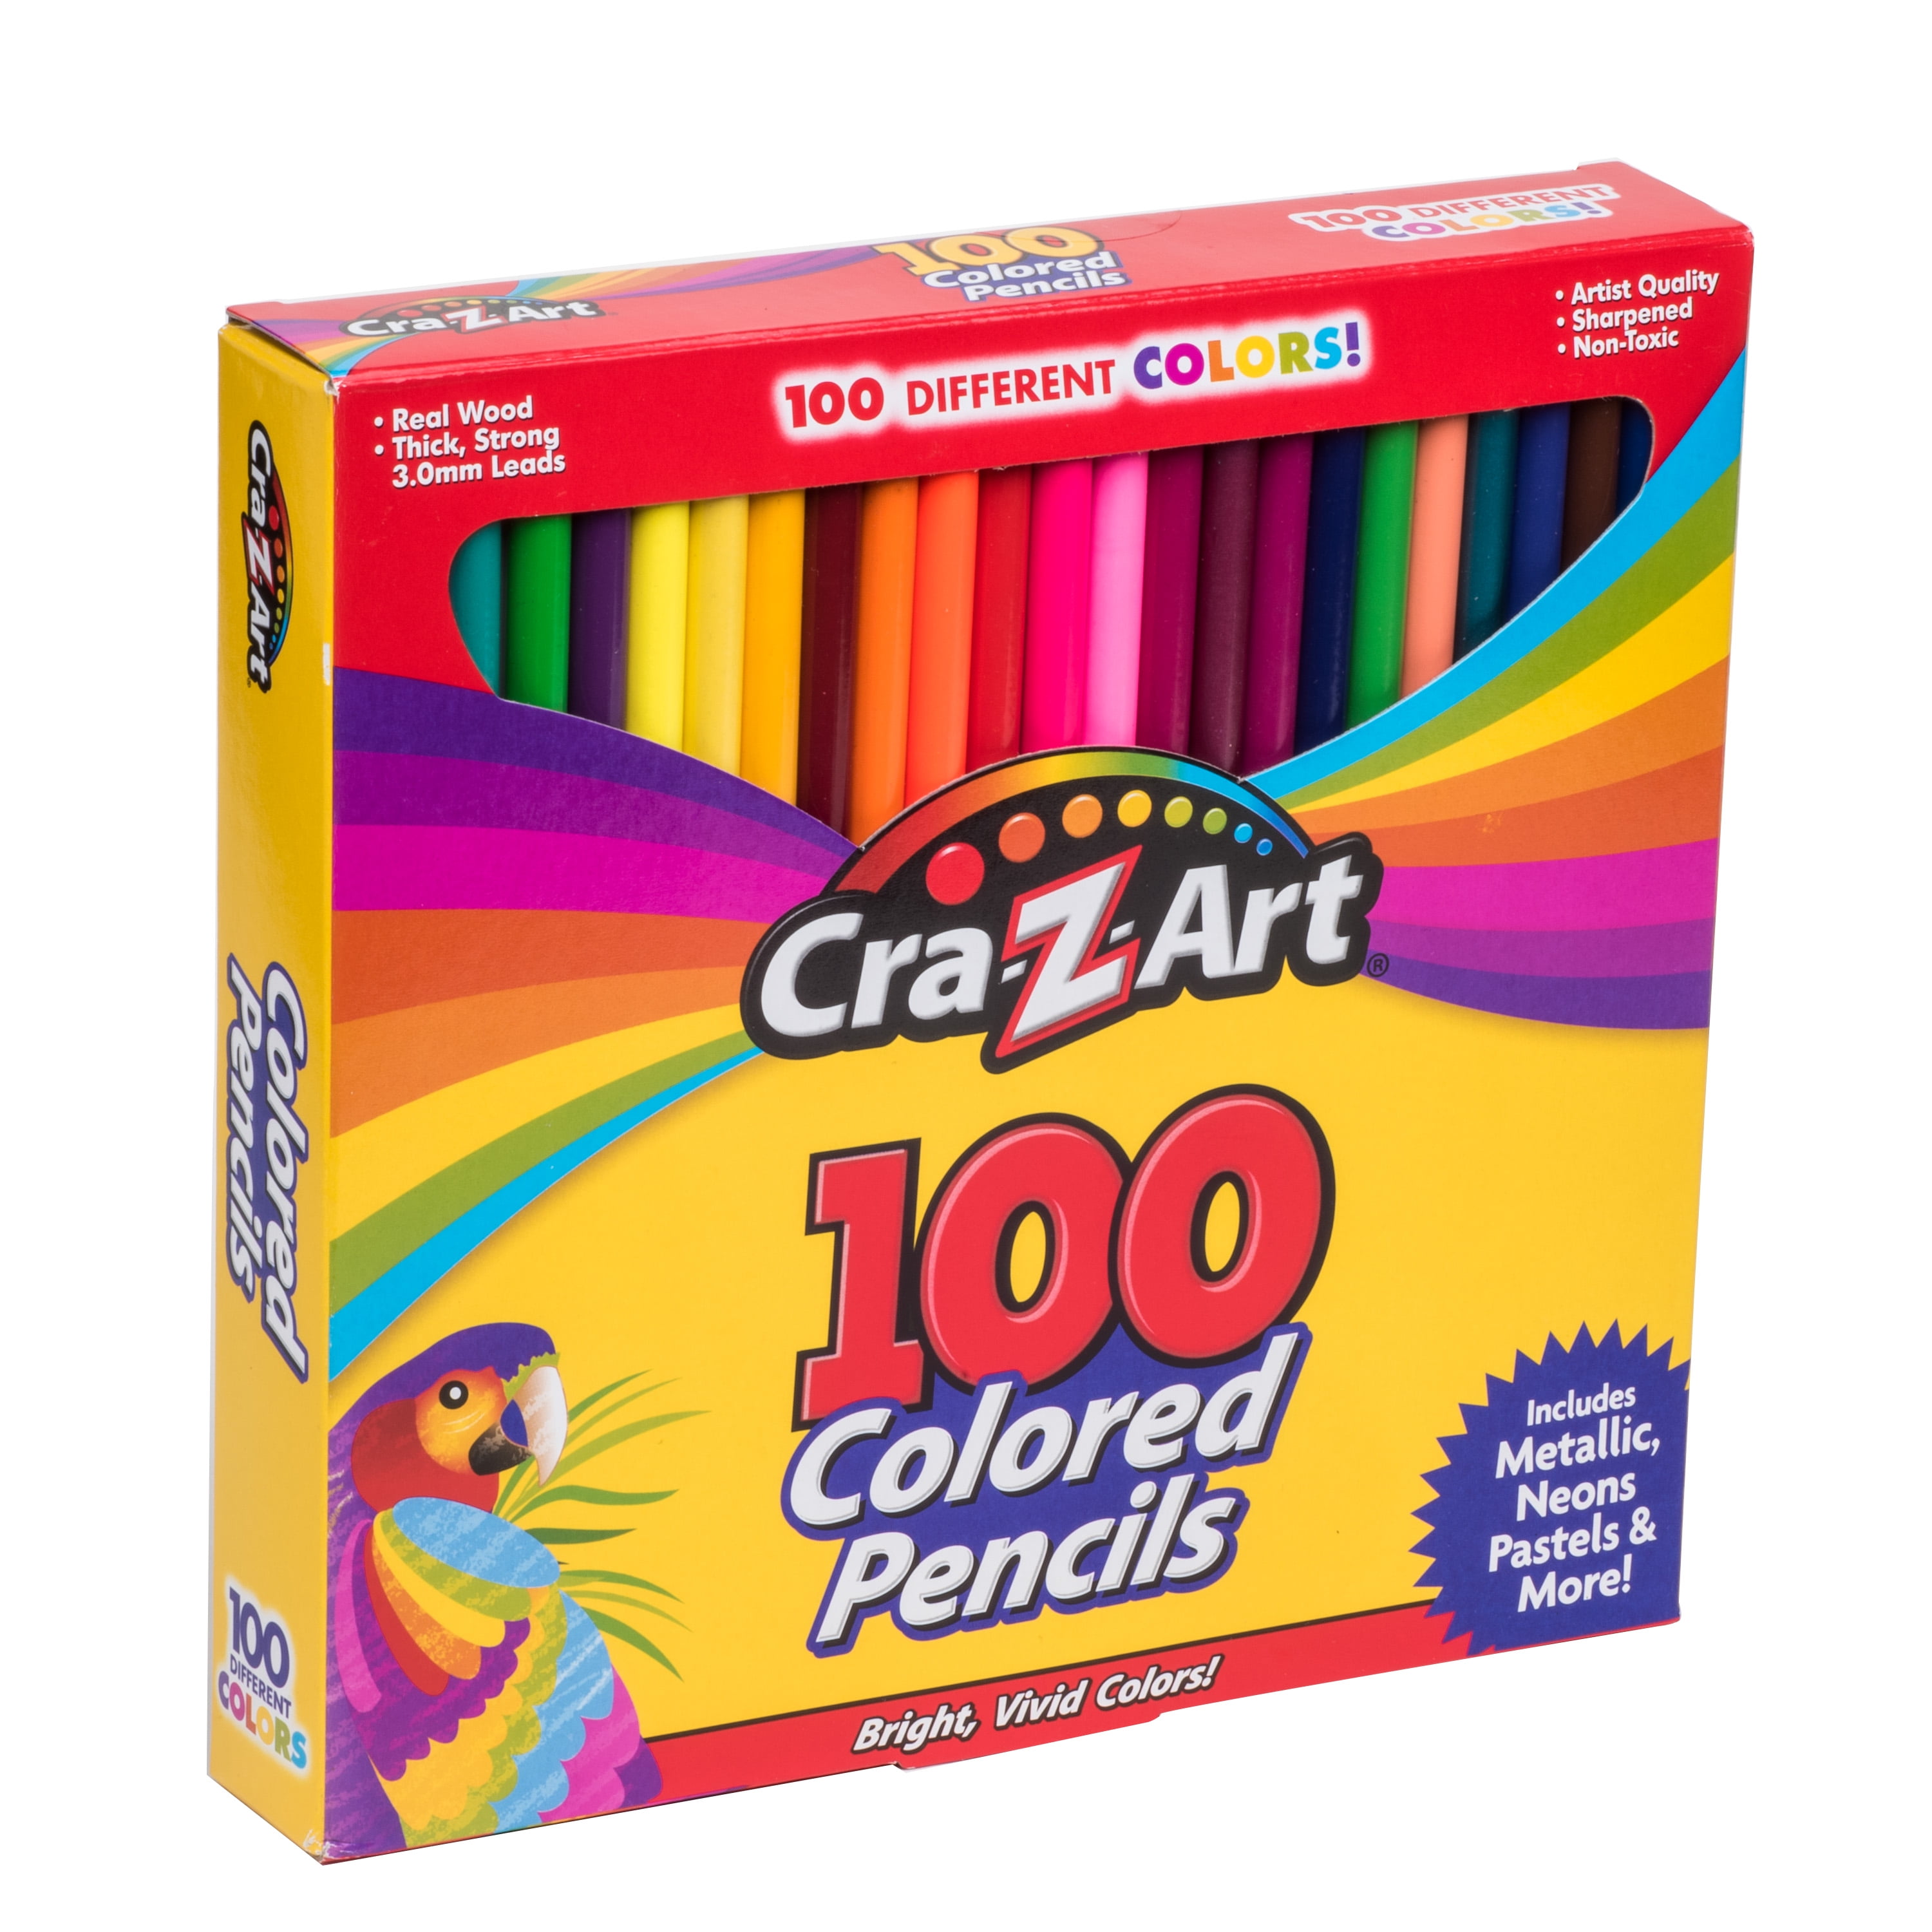 Arteza Kids Colored Pencils, 100 Colors, 50 Double-Sided Pencil Crayons,  Pre-Sharpened, Art and Back to School Supplies for Drawing and Doodling